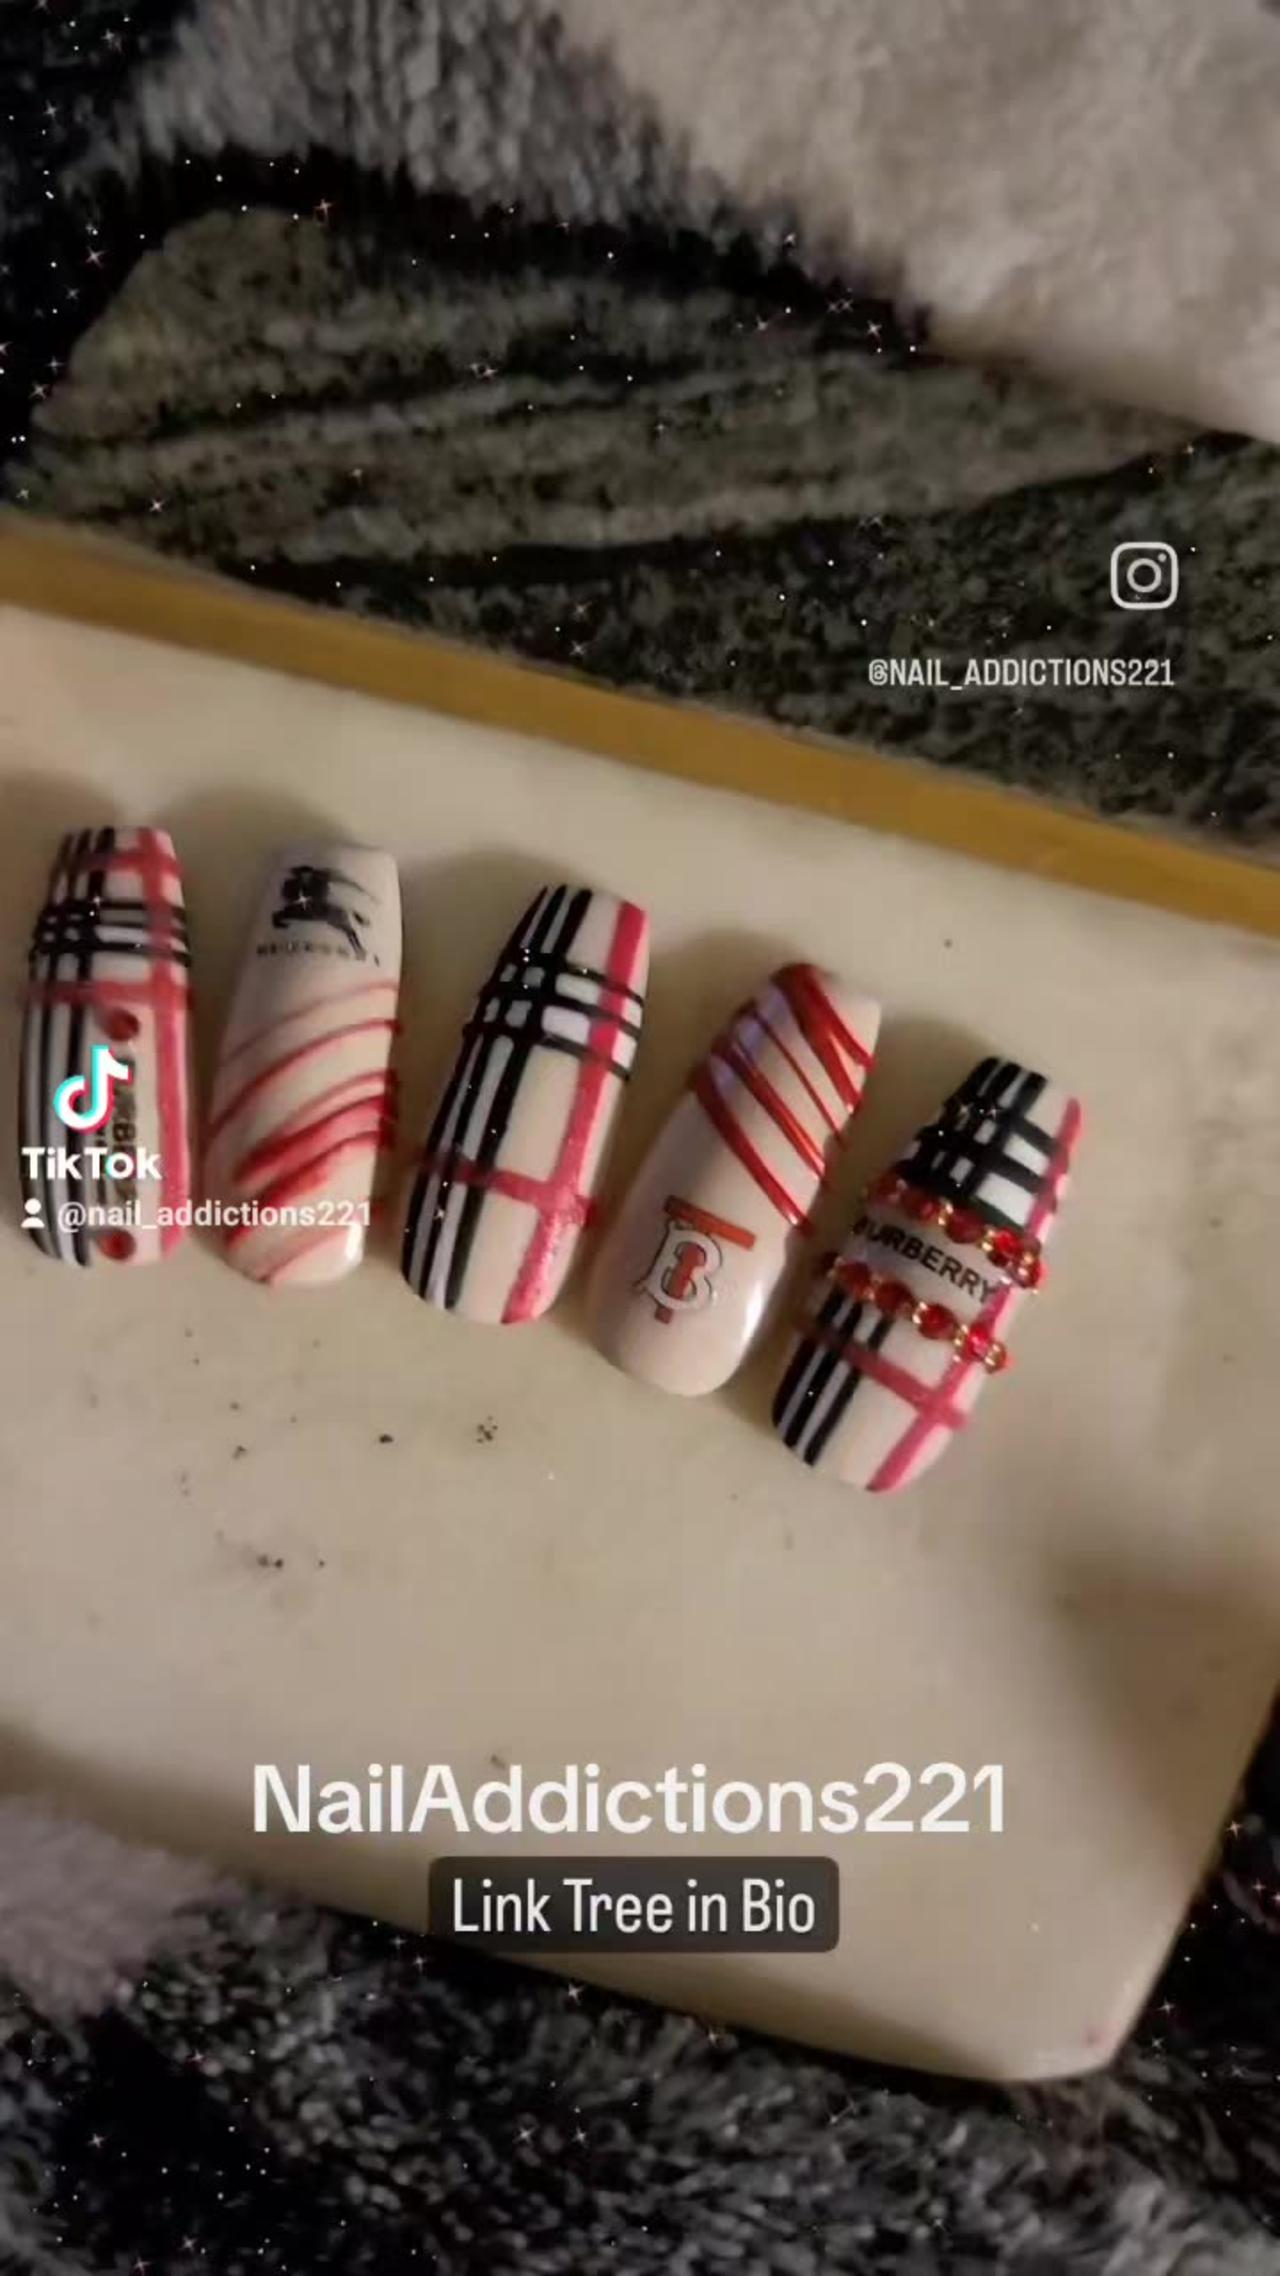 Burberry nails